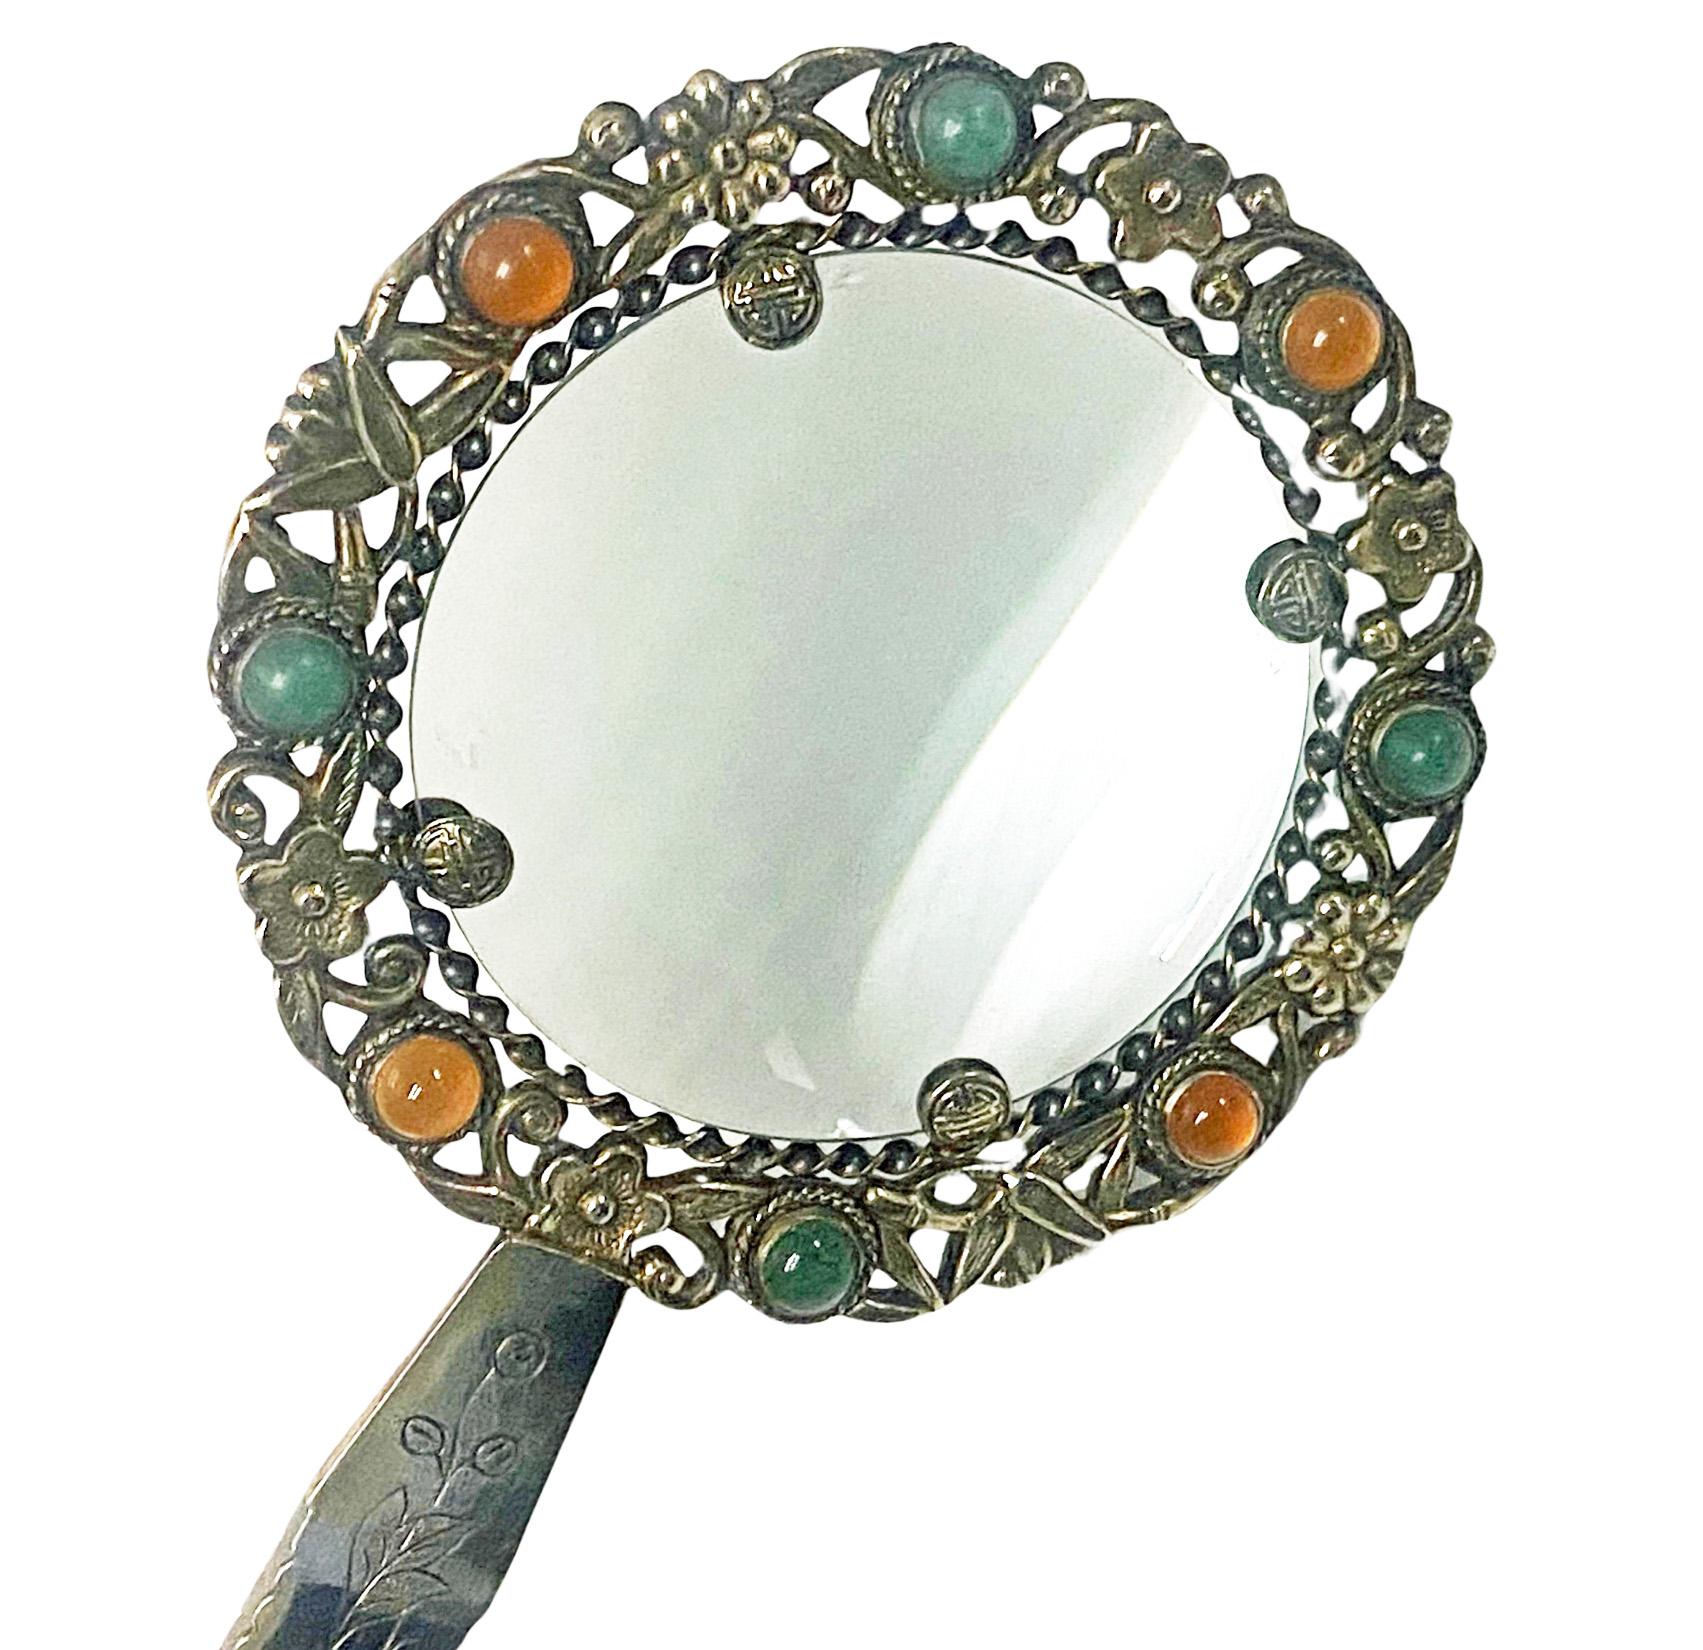  Chinese Export Silver and Jade Magnifying Glass, C.1890 In Good Condition For Sale In Toronto, ON